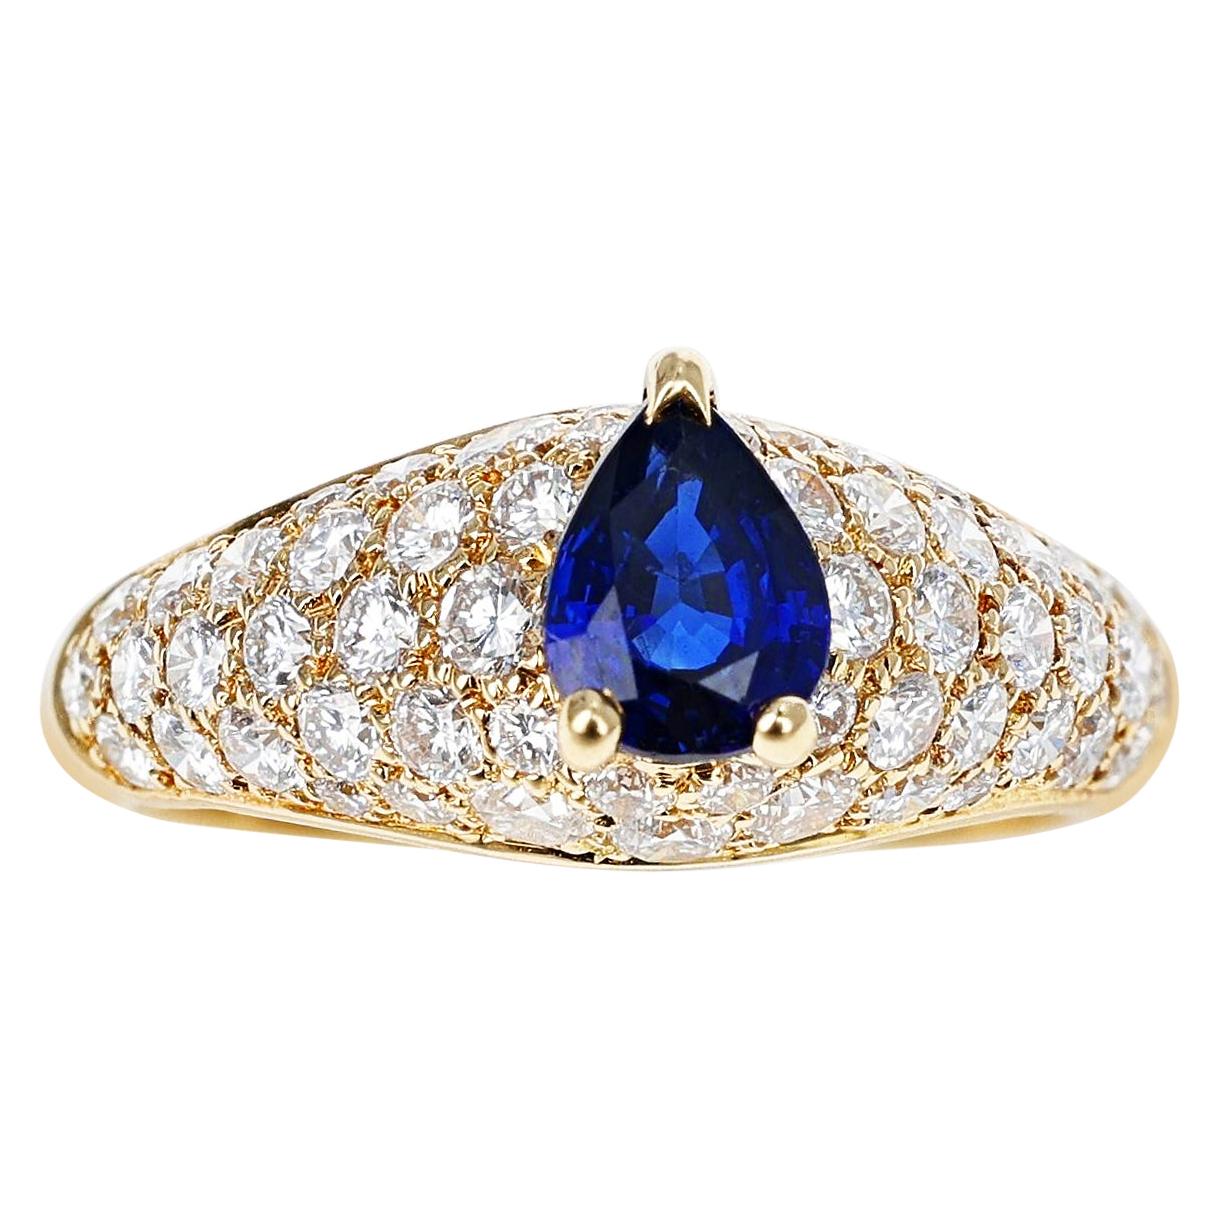 French Cartier Pear Shape Blue Sapphire Ring with Diamonds, 18 Karat Yellow Gold For Sale